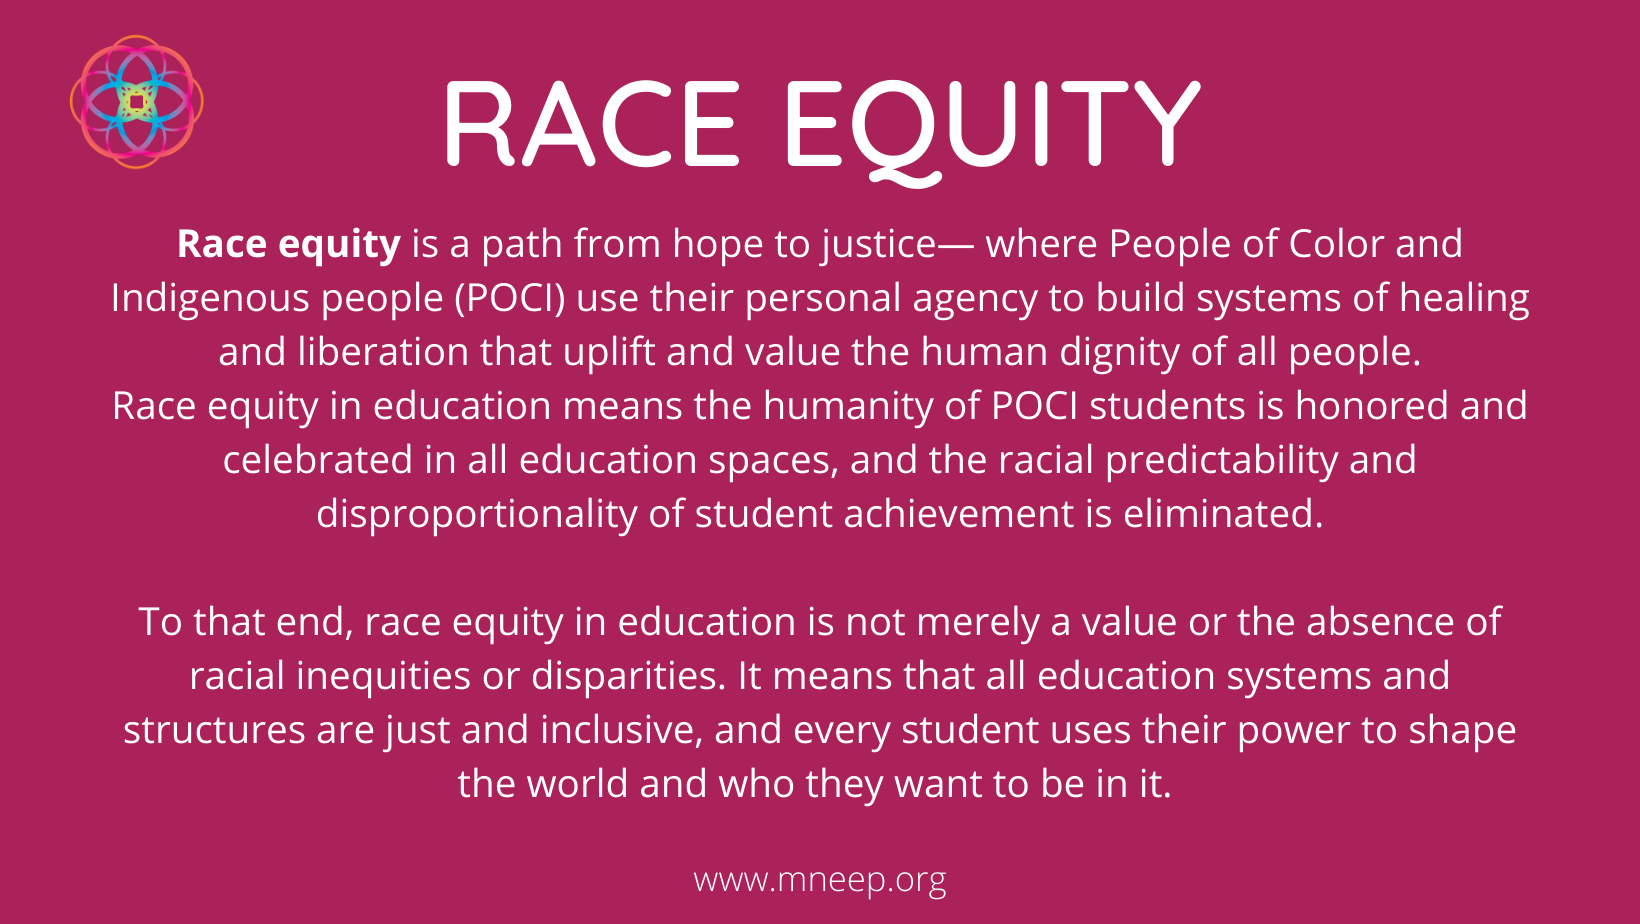 Race equity is a path from hope to justice, where people of color and indigenous people use their personal agency to build systems of healing and liberation that uplift and value the human dignity of all people. Race equity in education means the humanity of POCI students is honored and celebrated in all education spaces, and the racial predictability and disproportionality of student achievement is eliminated. To that end, race equity in education is not merely a value or the absence of racial inequities or disparities. It means that all education systems and structures are just and inclusive, and every student uses their power to shape the world and wo they want to be in it.